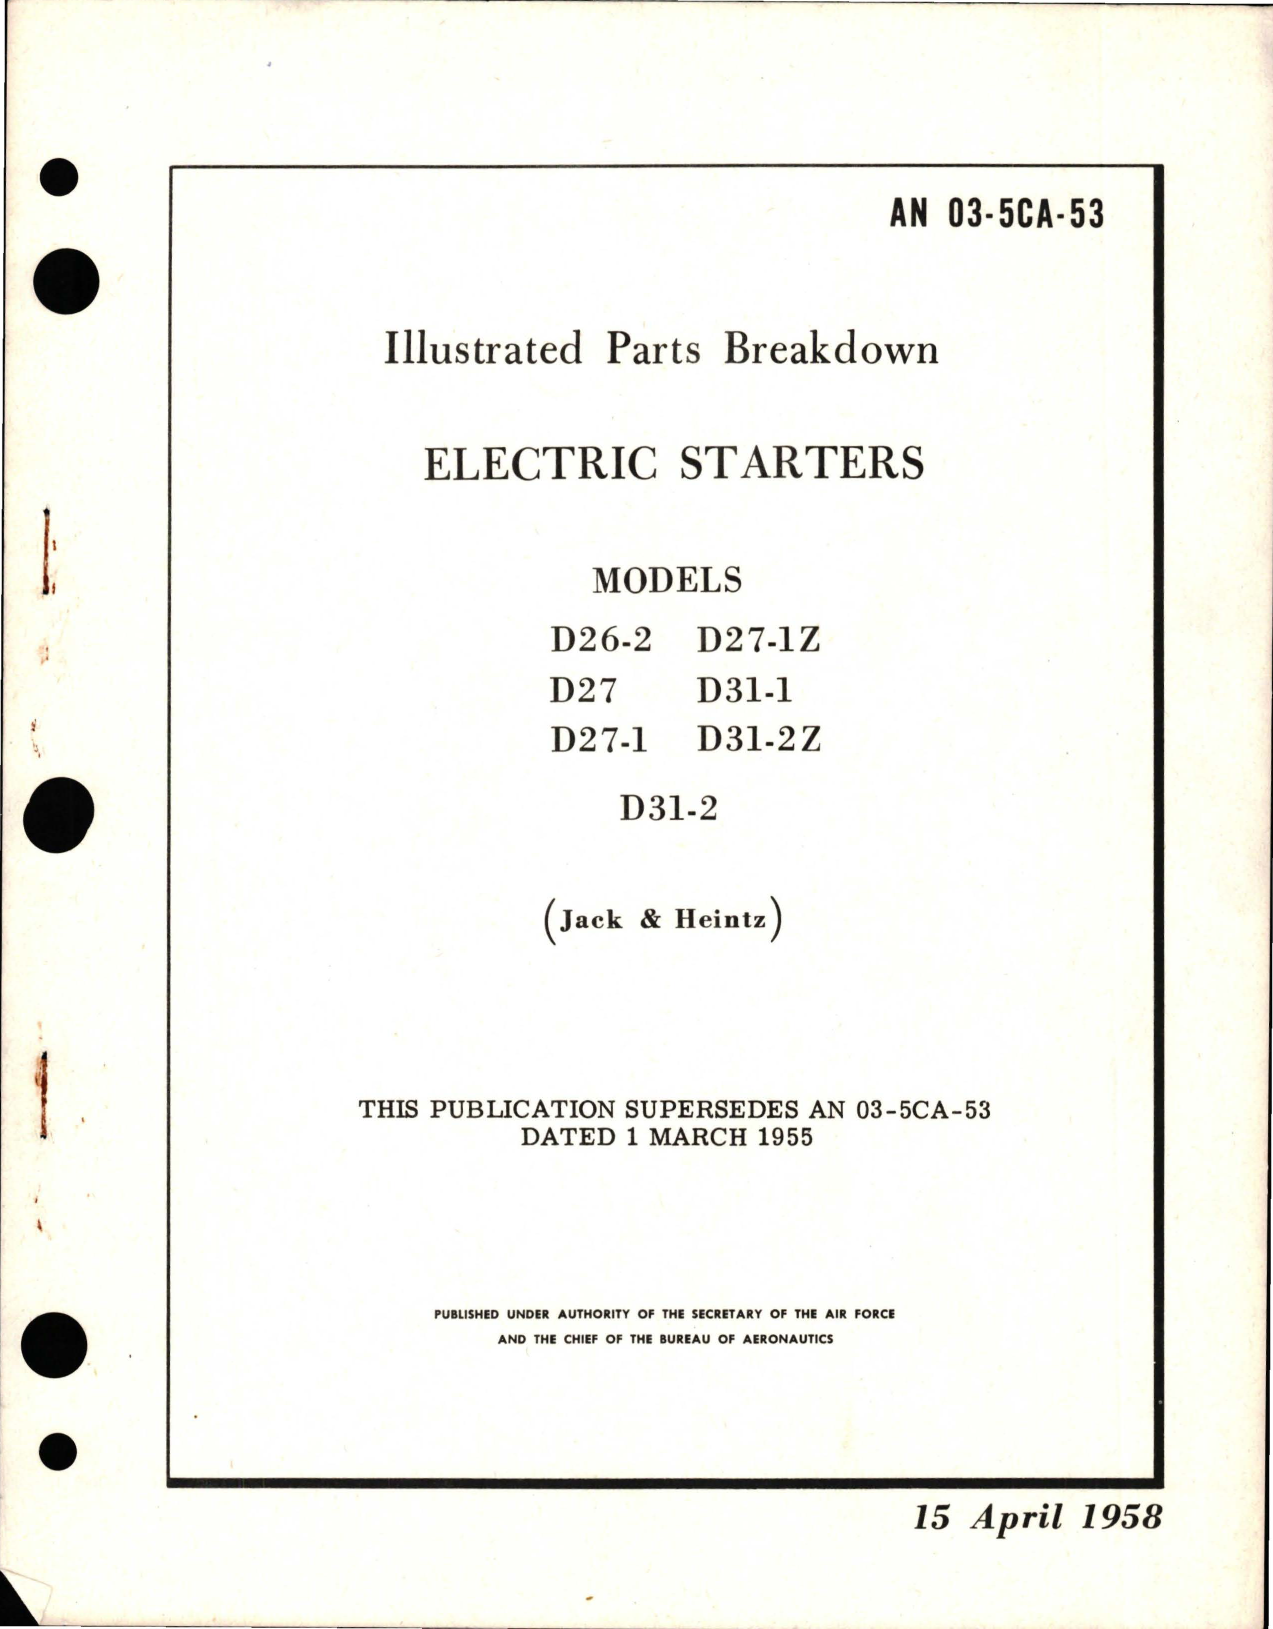 Sample page 1 from AirCorps Library document: Illustrated Parts Breakdown for Electric Starters